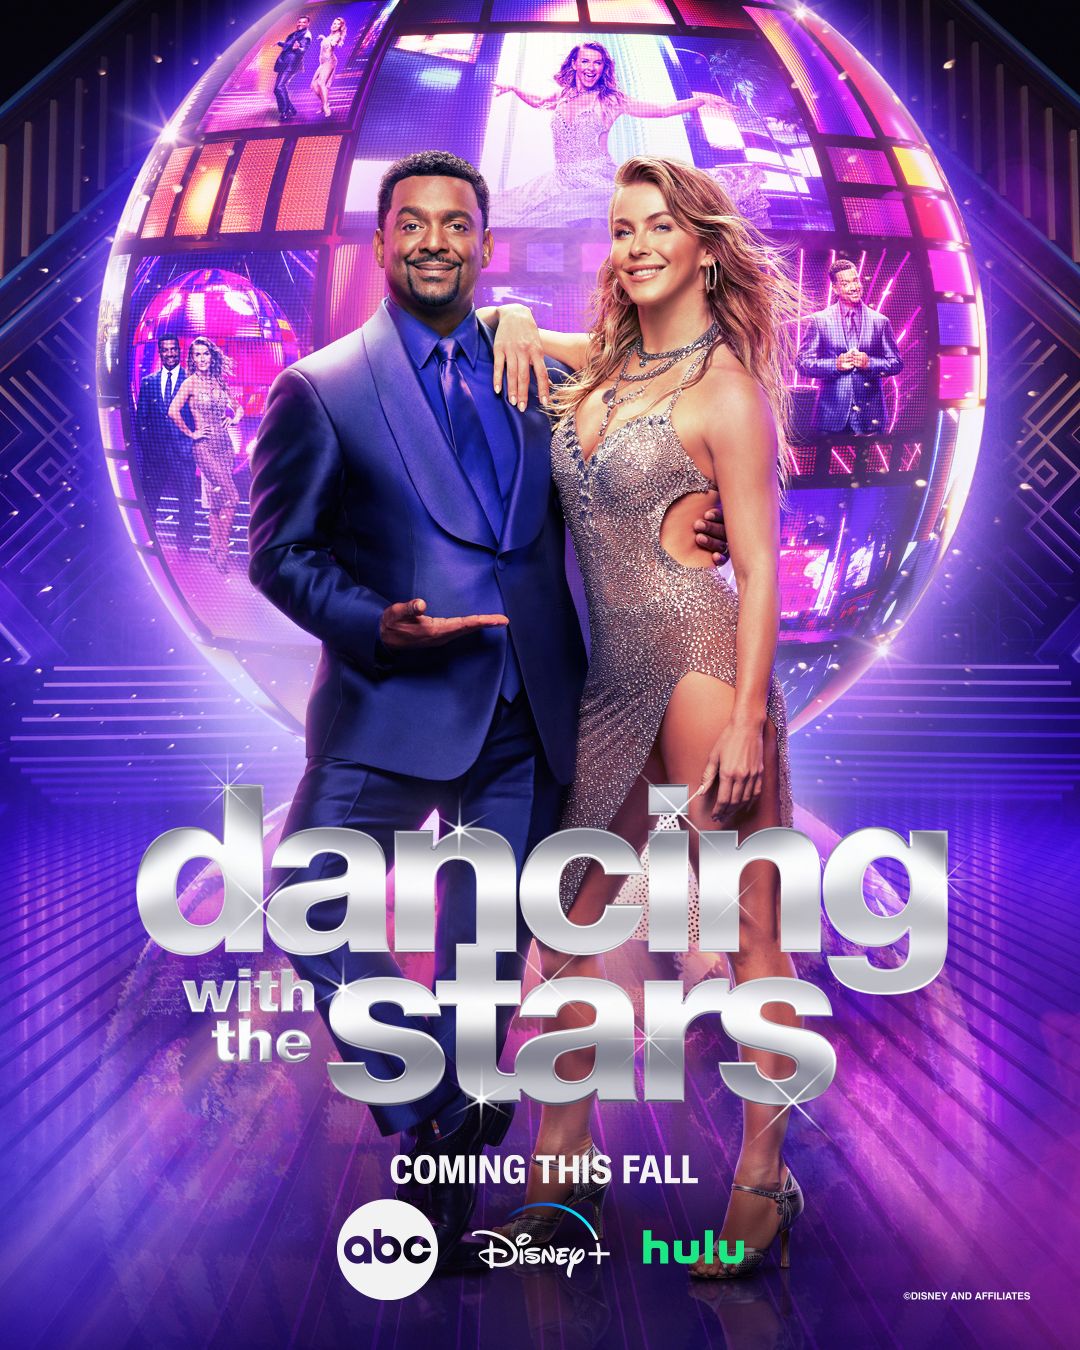 Every 'Dancing With the Stars' season 32 song and dance